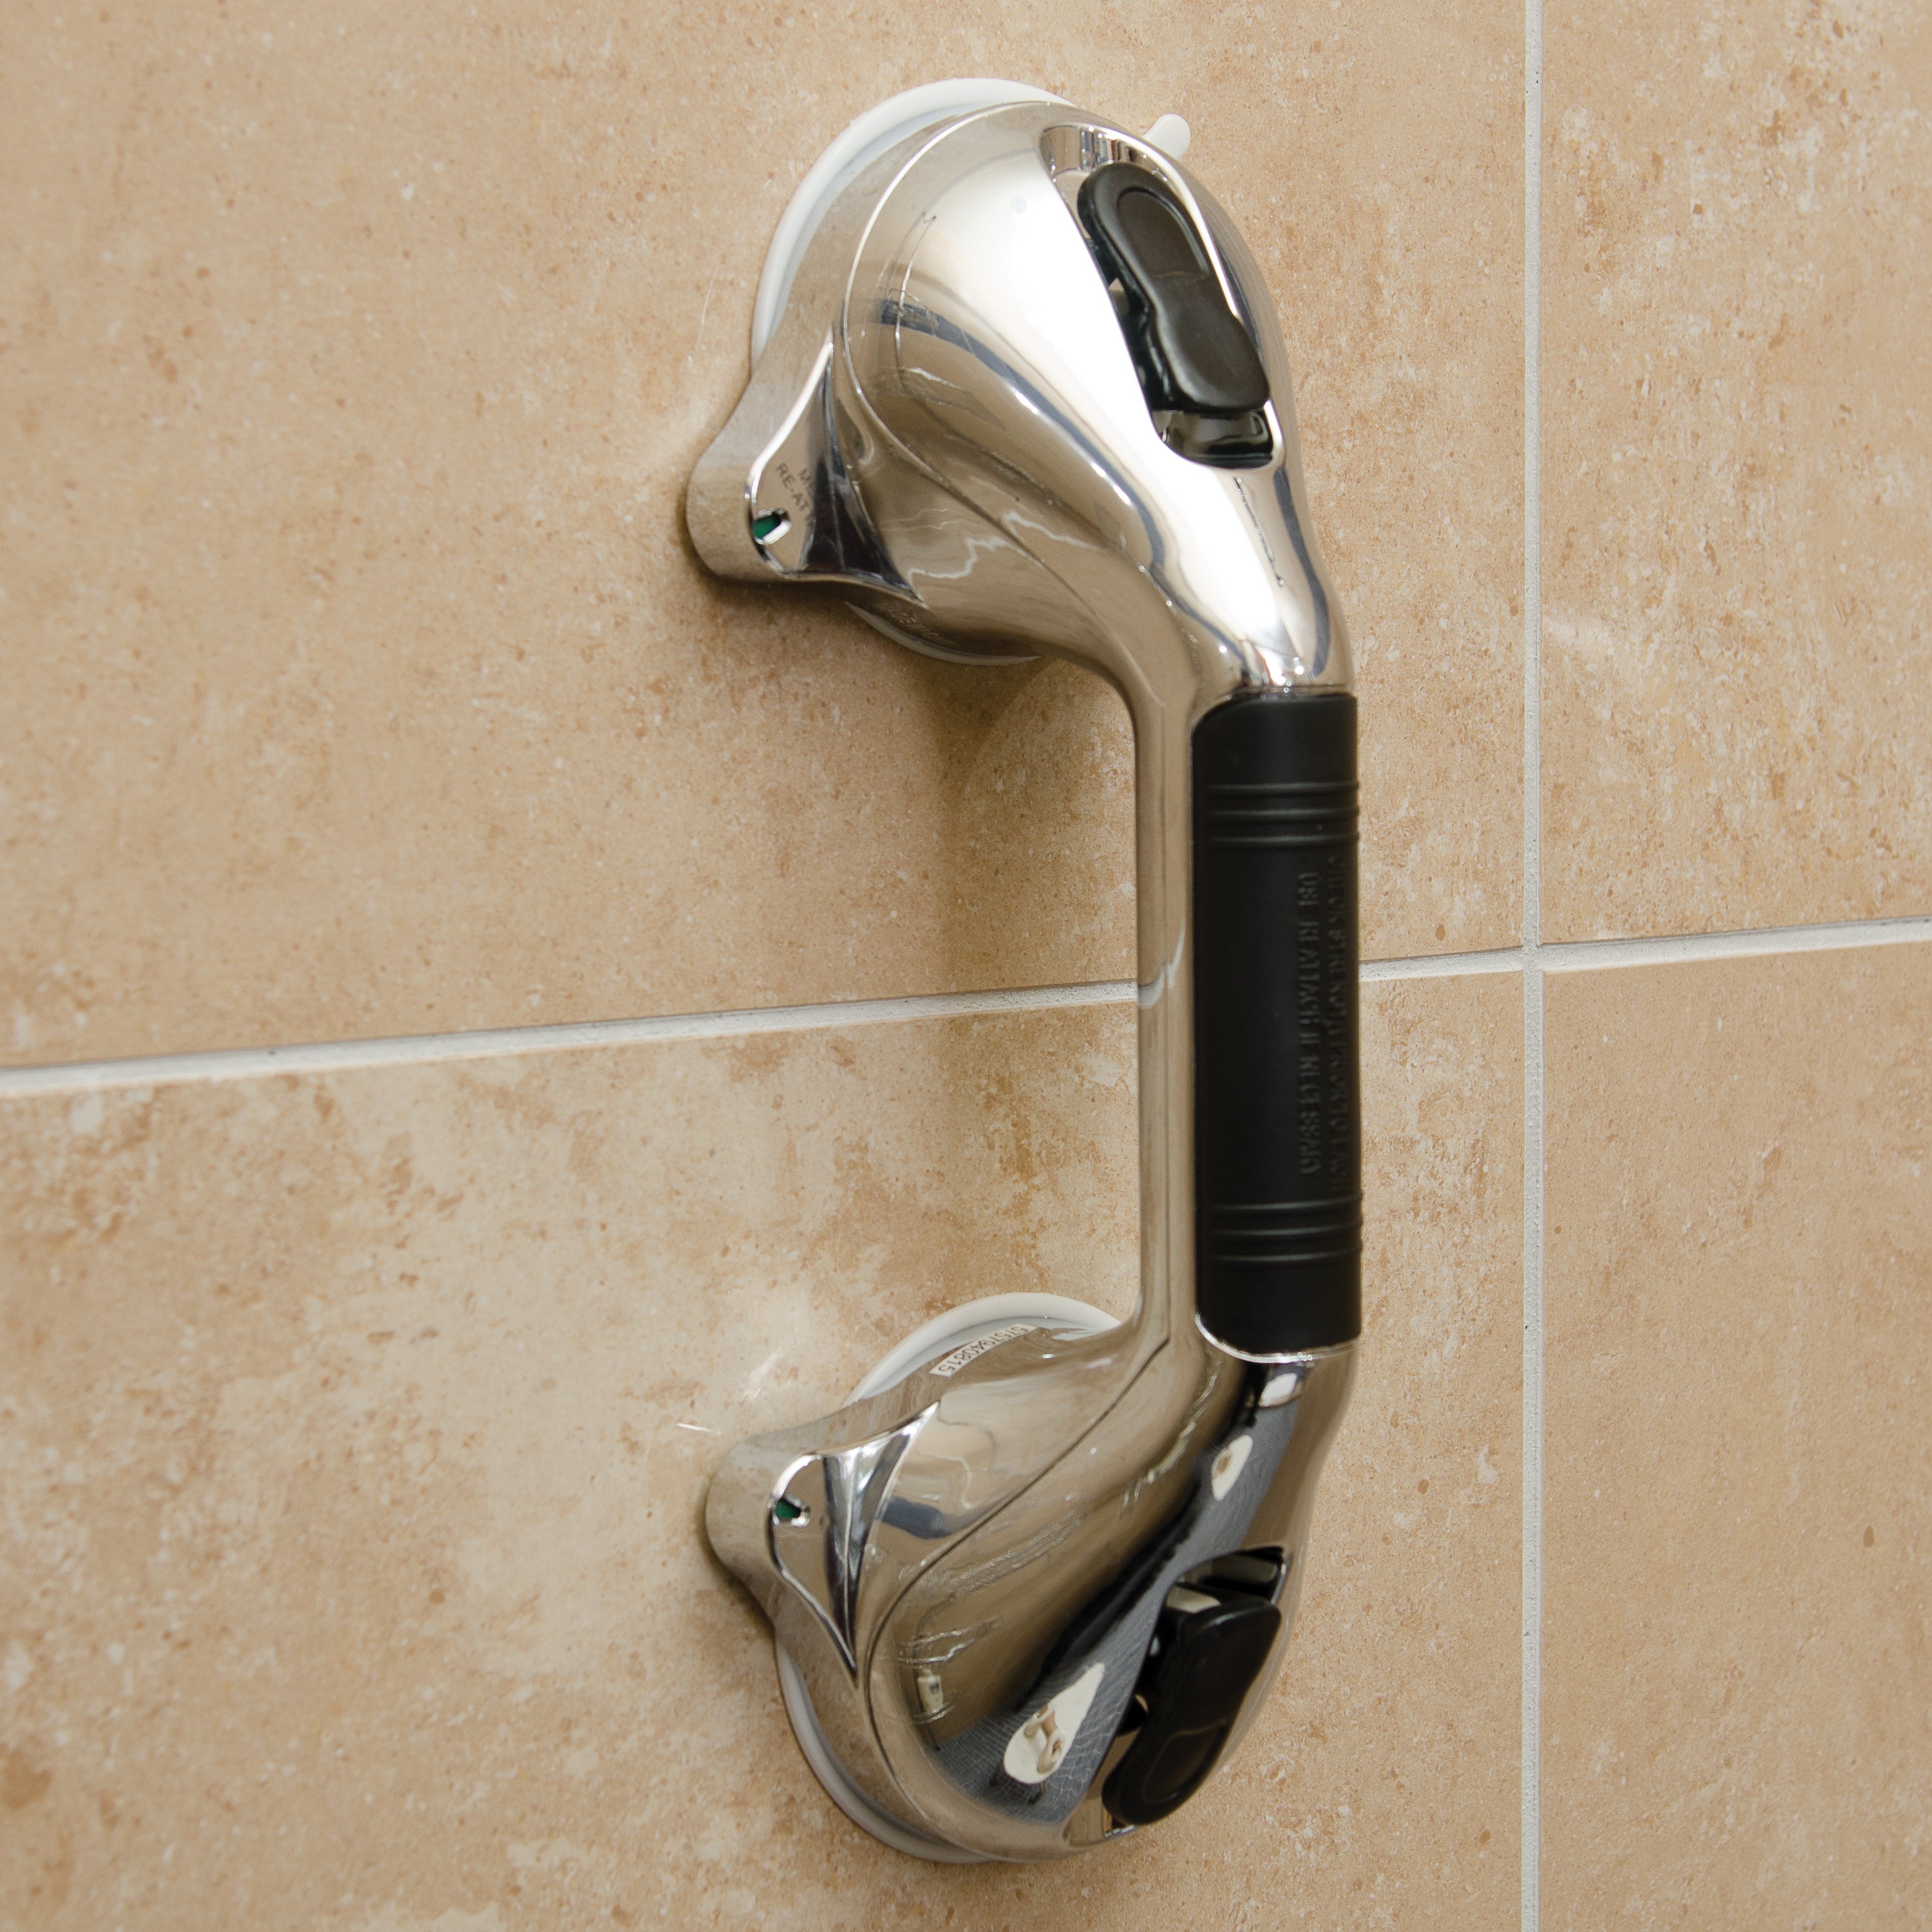 HealthSmart Suction Cup Grab Bars with BactiX Antimicrobial AM-521-1562-1901